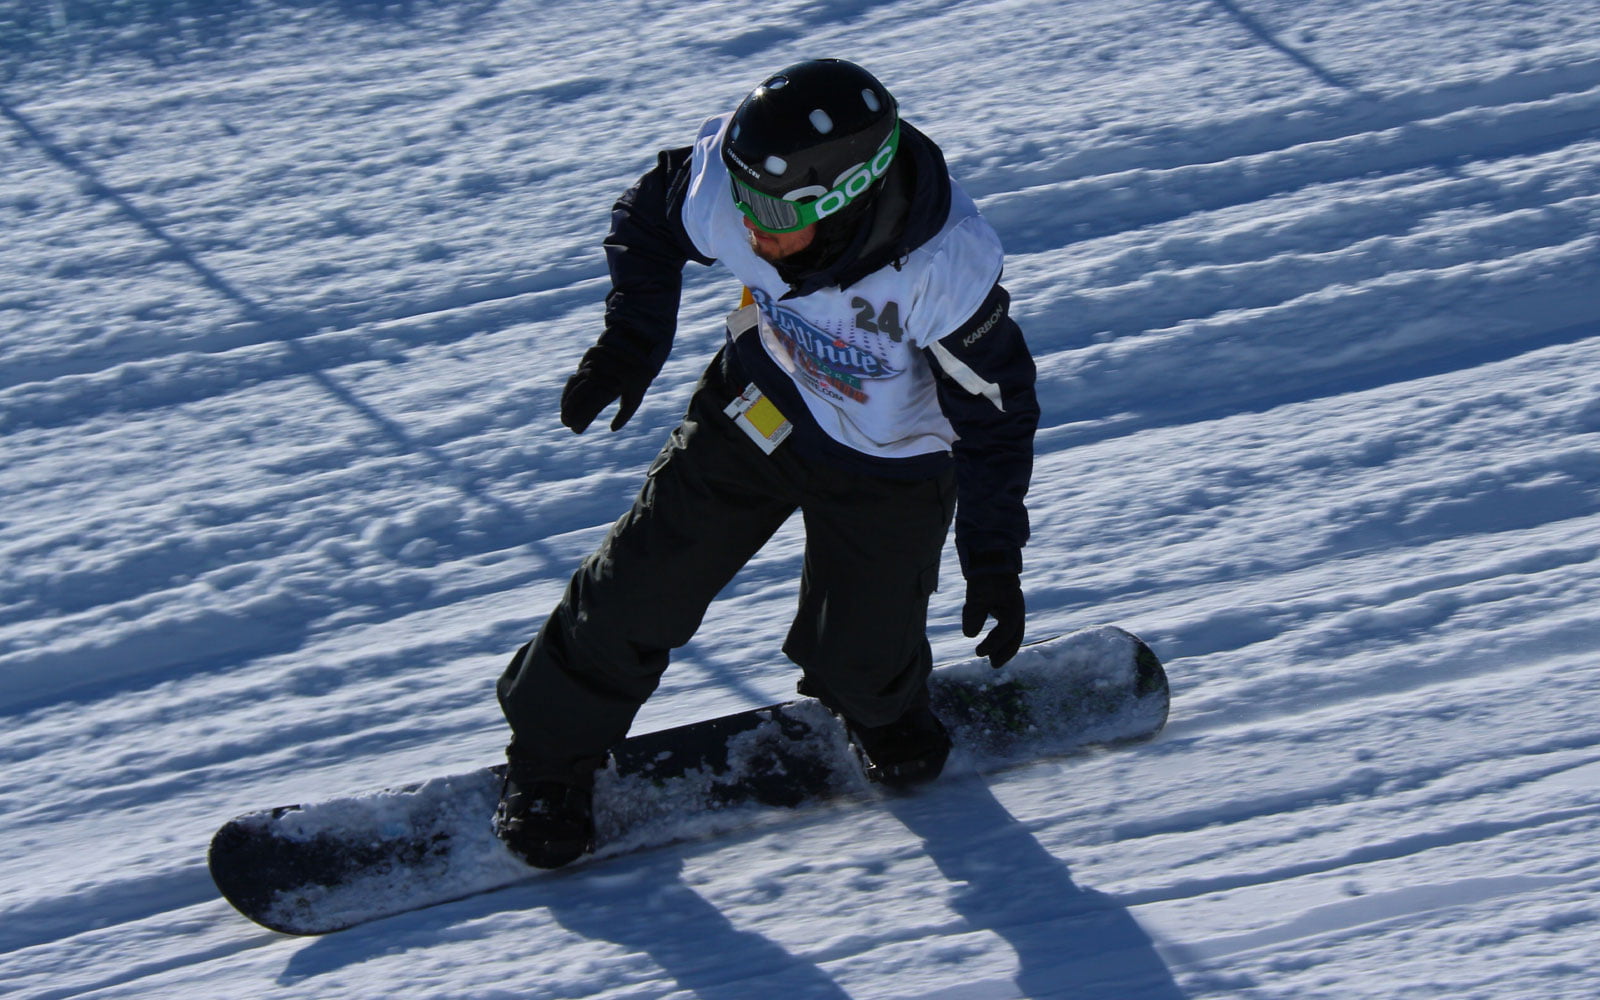 New Scholarship Opportunity To Remember Australian Para-Snowboard Pioneer